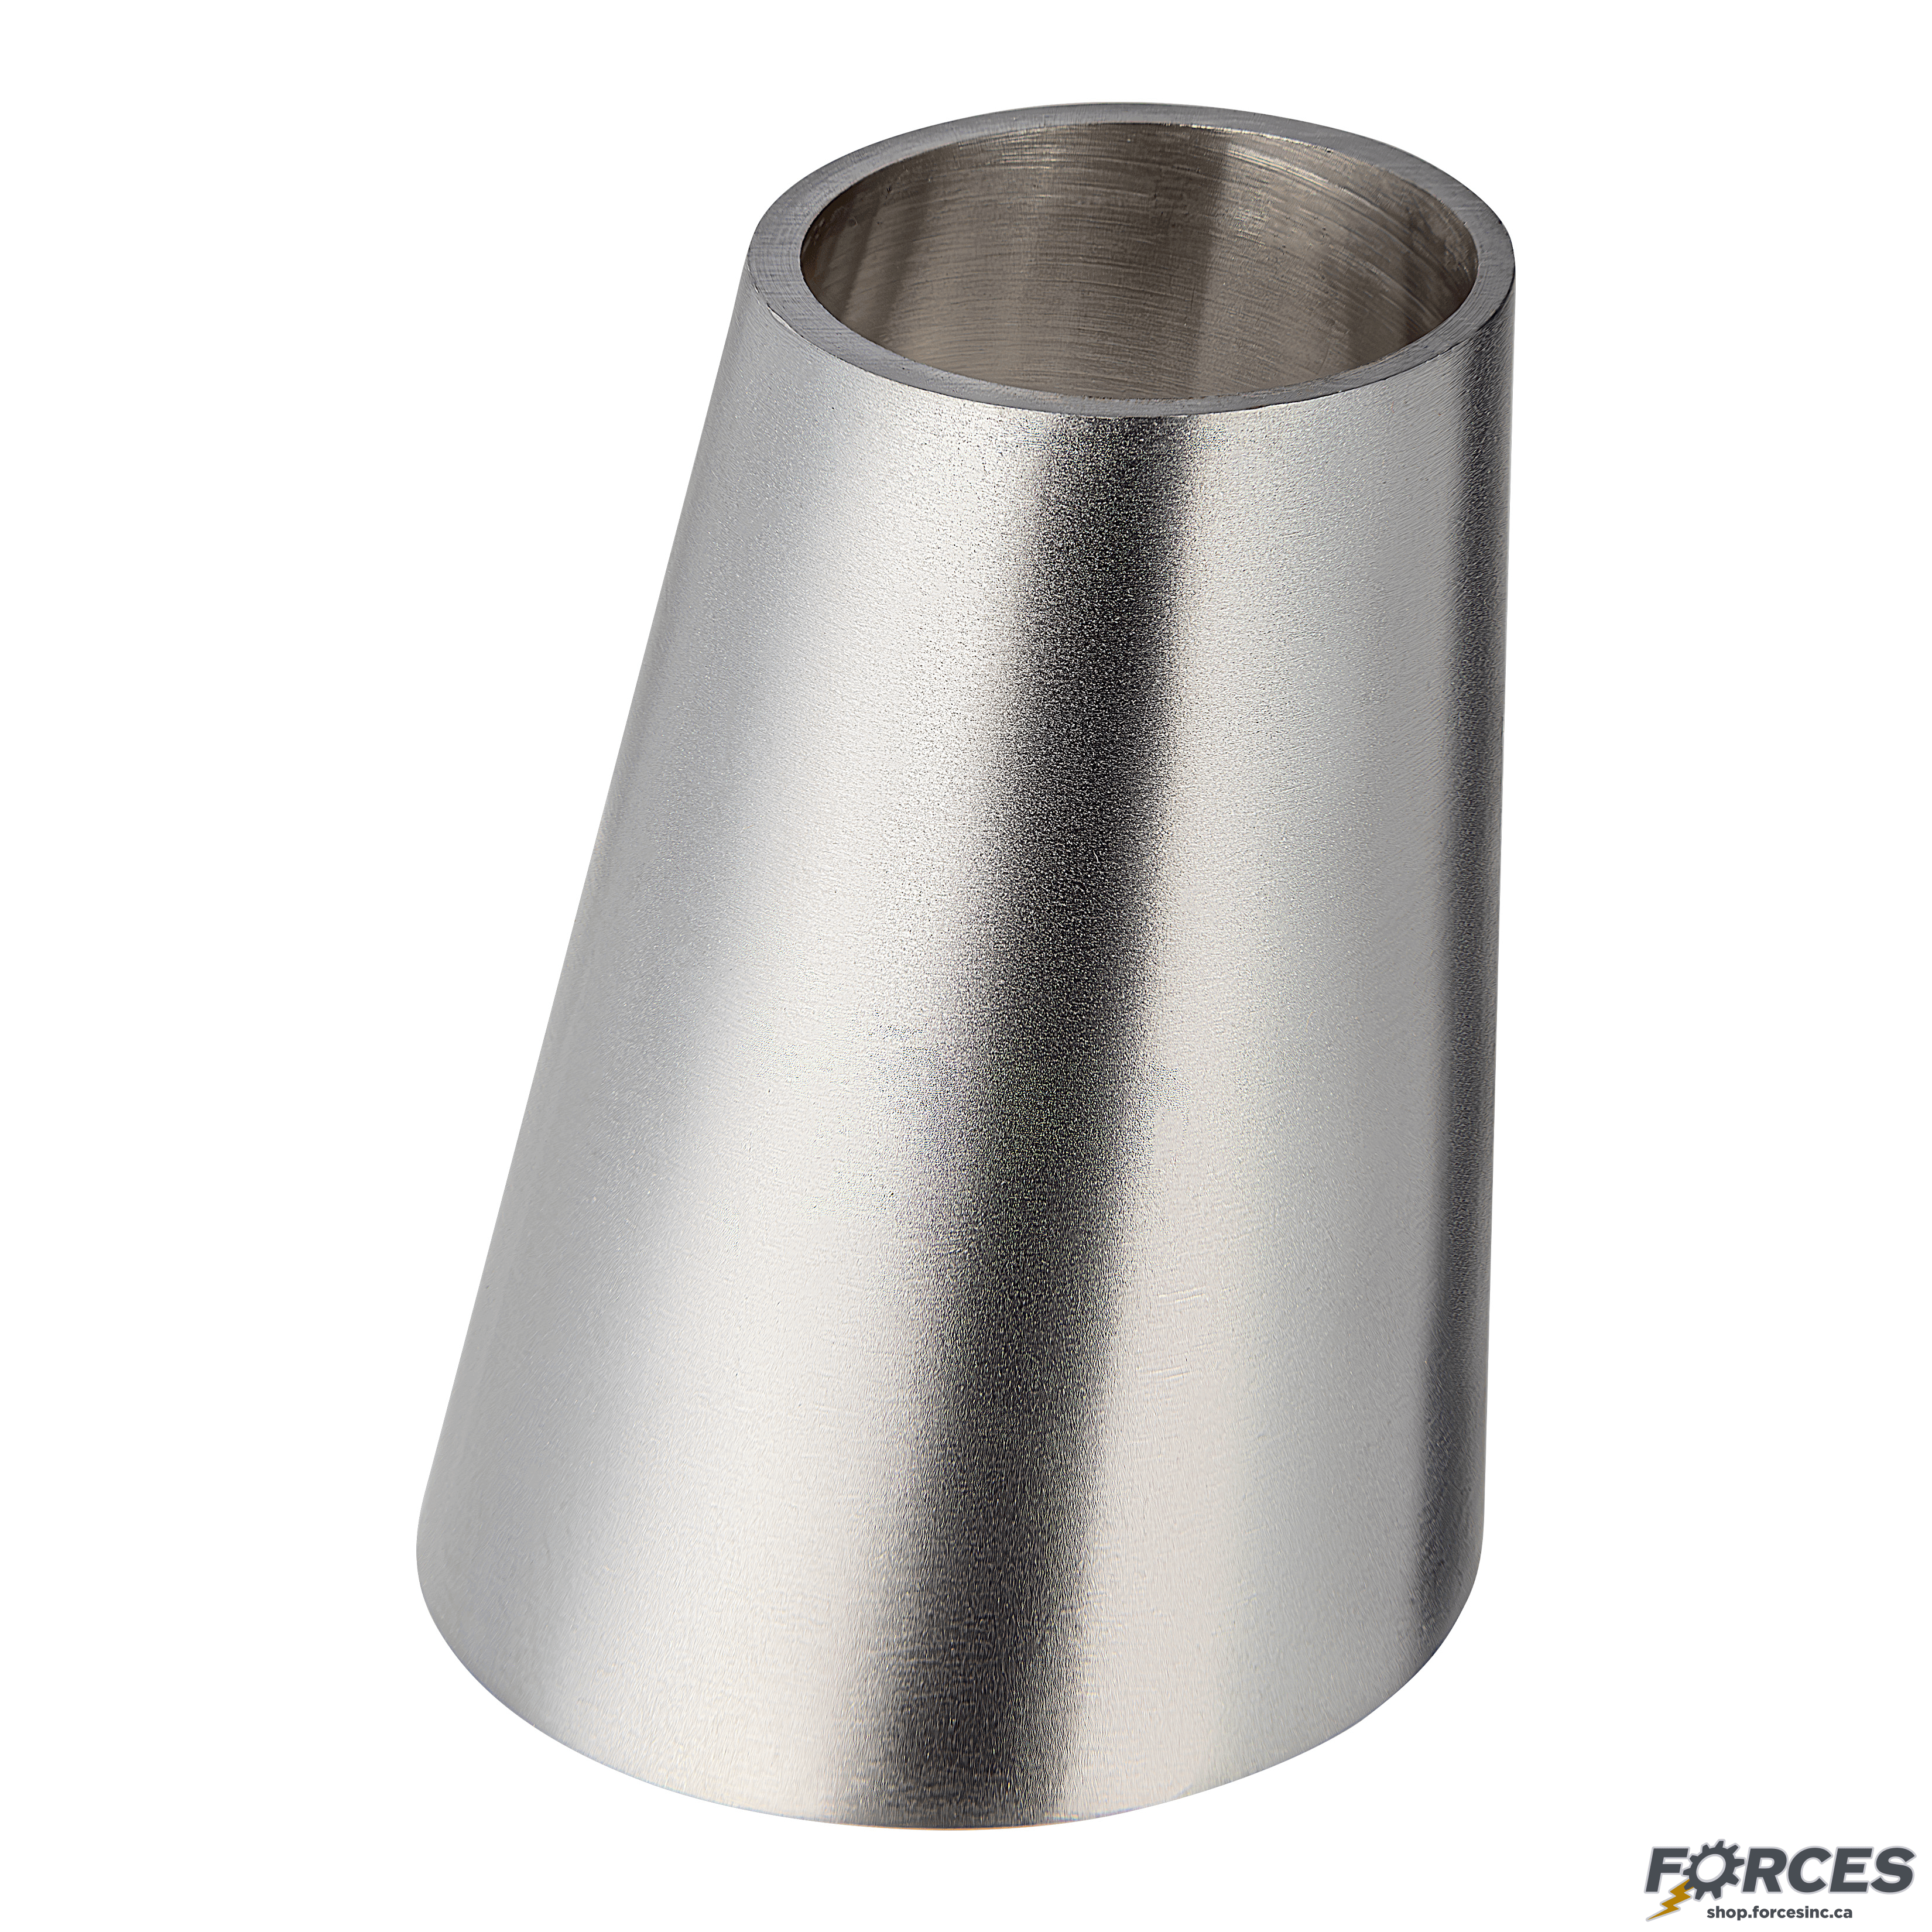 4" x 2" Butt Weld Eccentric Reducer - Stainless Steel 316 - Forces Inc